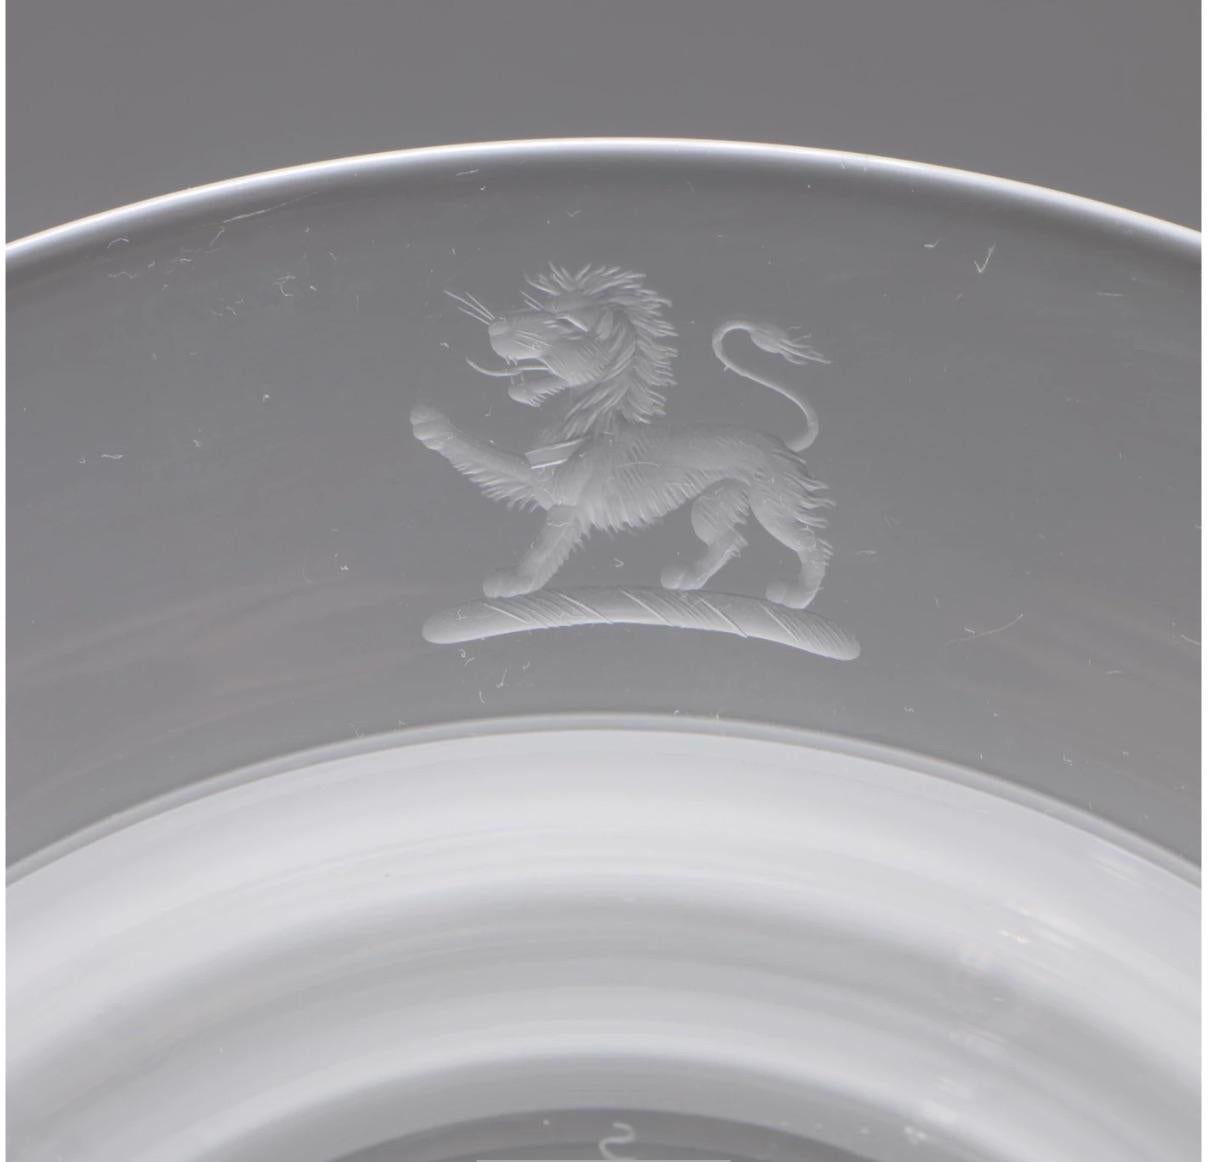 Breathtakingly beautiful Important Rare Steuben Glass Copper Wheel Engraved Lion crystal Bowls- set of 10 in original Steuben labeled flannel covers. Marked with an S for Steuben, as appropriately marked-
Mid 20th Century-

A work of art and